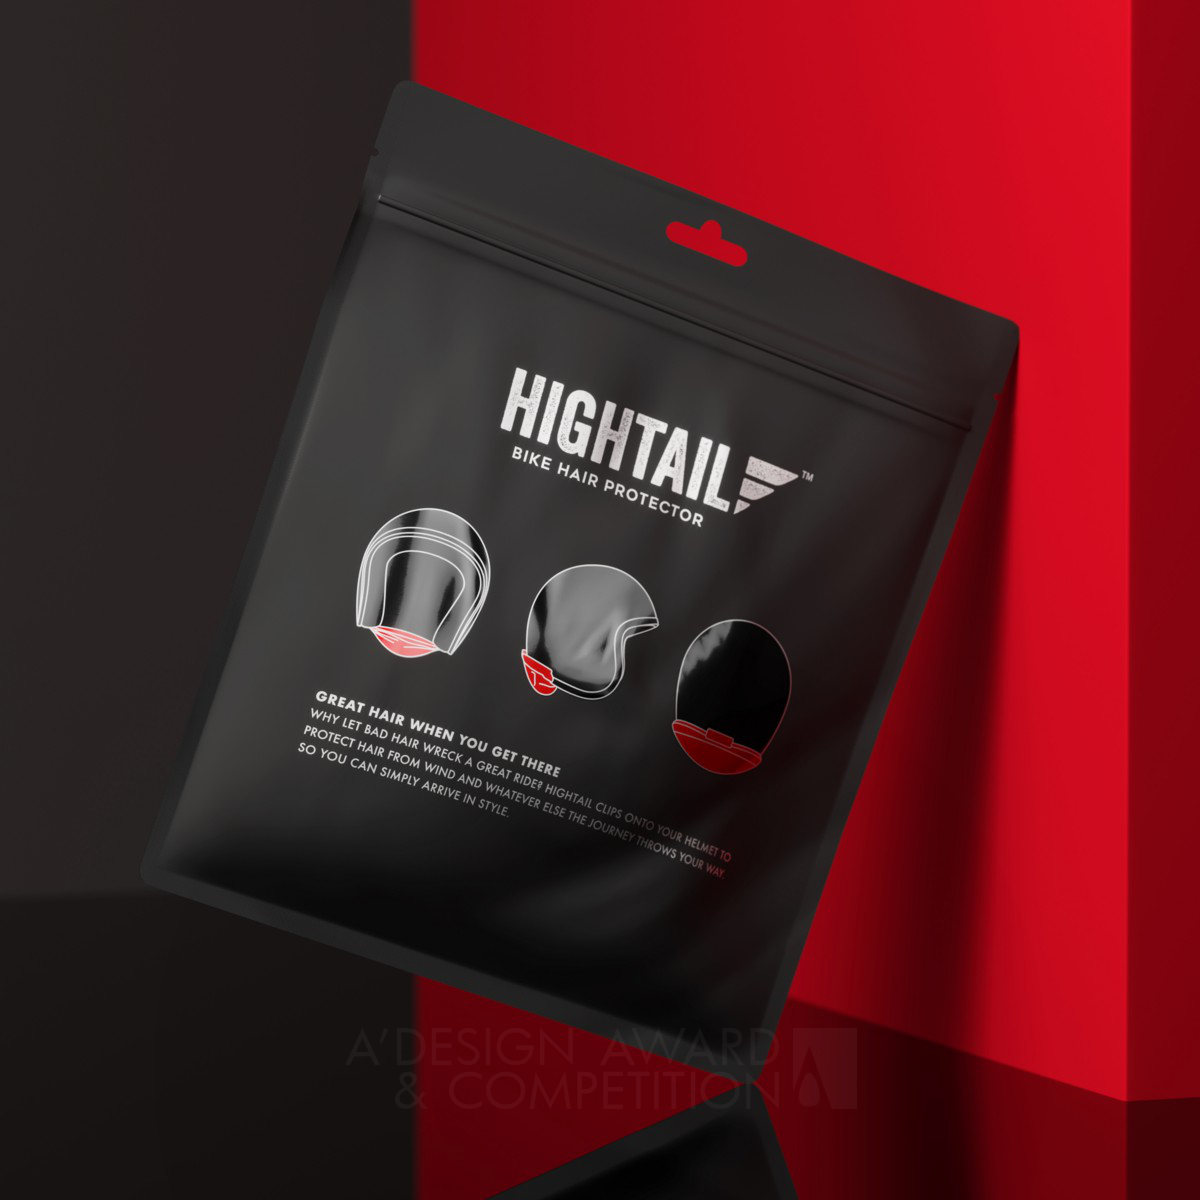 Hightail Packaging by Angela Spindler